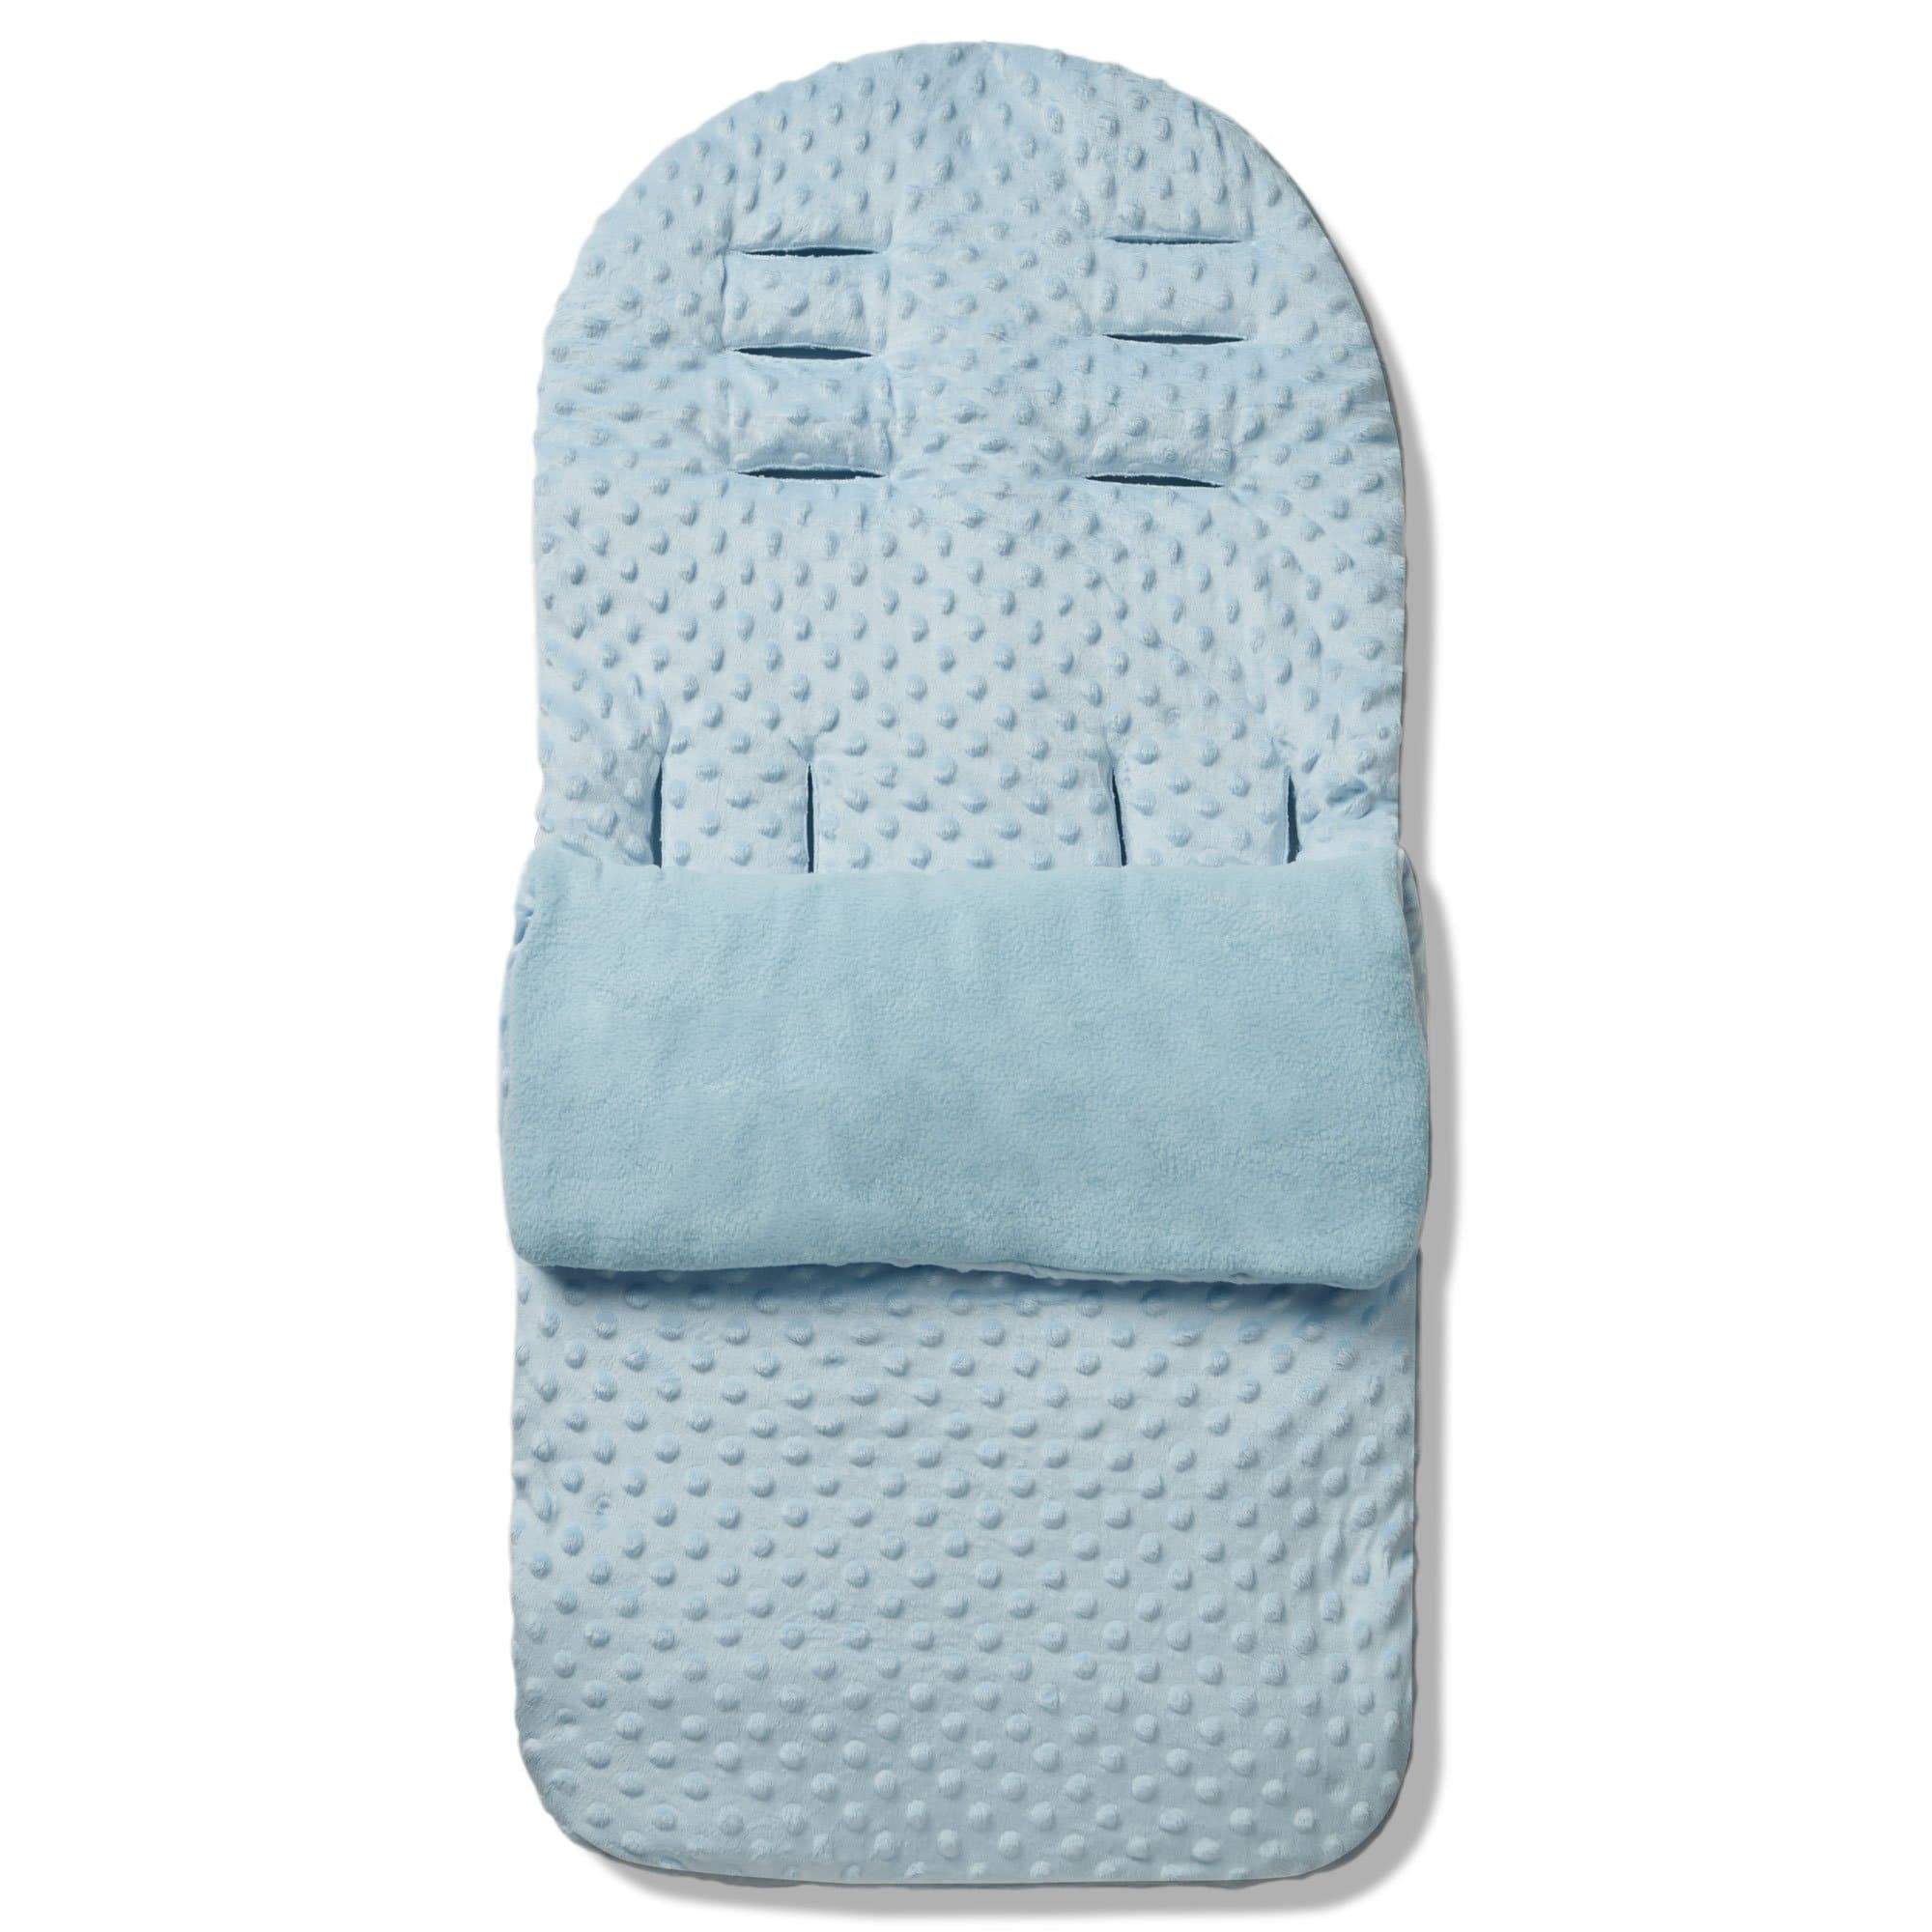 Dimple Footmuff / Cosy Toes Compatible with Babywelt - Blue / Fits All Models | For Your Little One